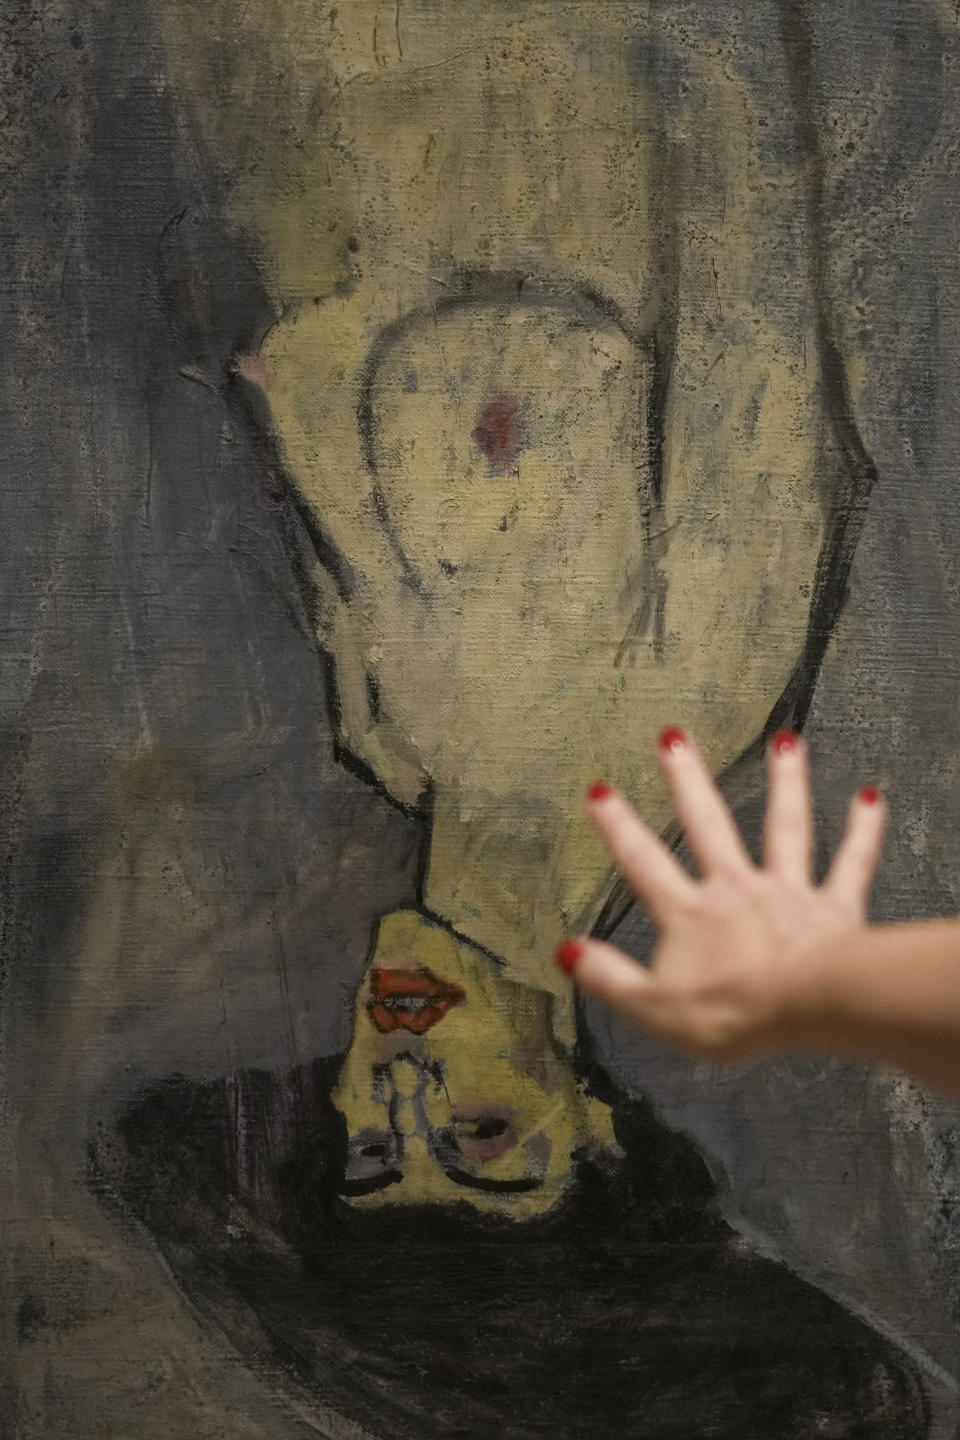 Inna Berkowits, an art historian at the Haifa University's Hecht Museum, explains about Amadeo Modigliani's 1908 "Nude with a Hat," hung upside down because another painting by him, "Maud Abrantes," on the reverse side of the same canvas is oriented correctly, while on display at Haifa University's Hecht Museum in Haifa, Israel, June 28, 2022. Curators at the museum using x-ray technology have discovered three previously unknown sketches by the celebrated 20th century artist hiding beneath the surface of the painting. (AP Photo/Ariel Schalit)